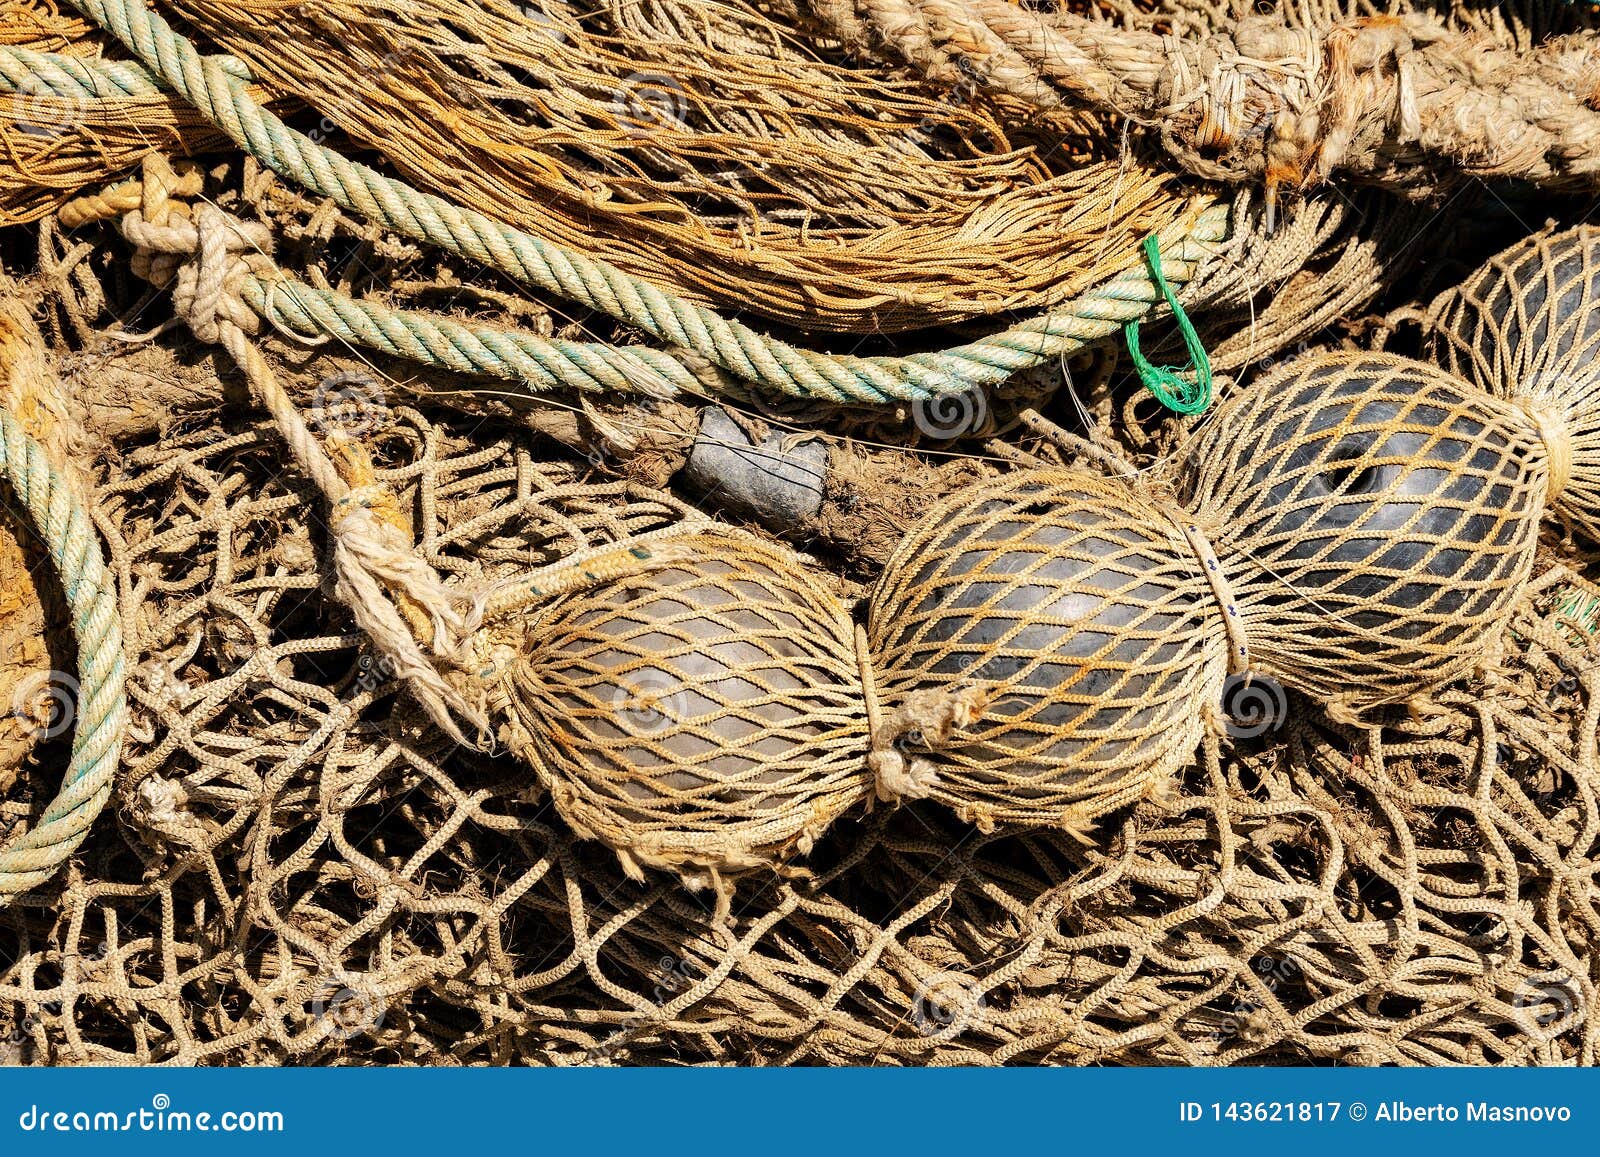 Old Fishing Nets with Ropes and Floats - Full Frame Stock Image - Image of  knot, equipment: 143621817